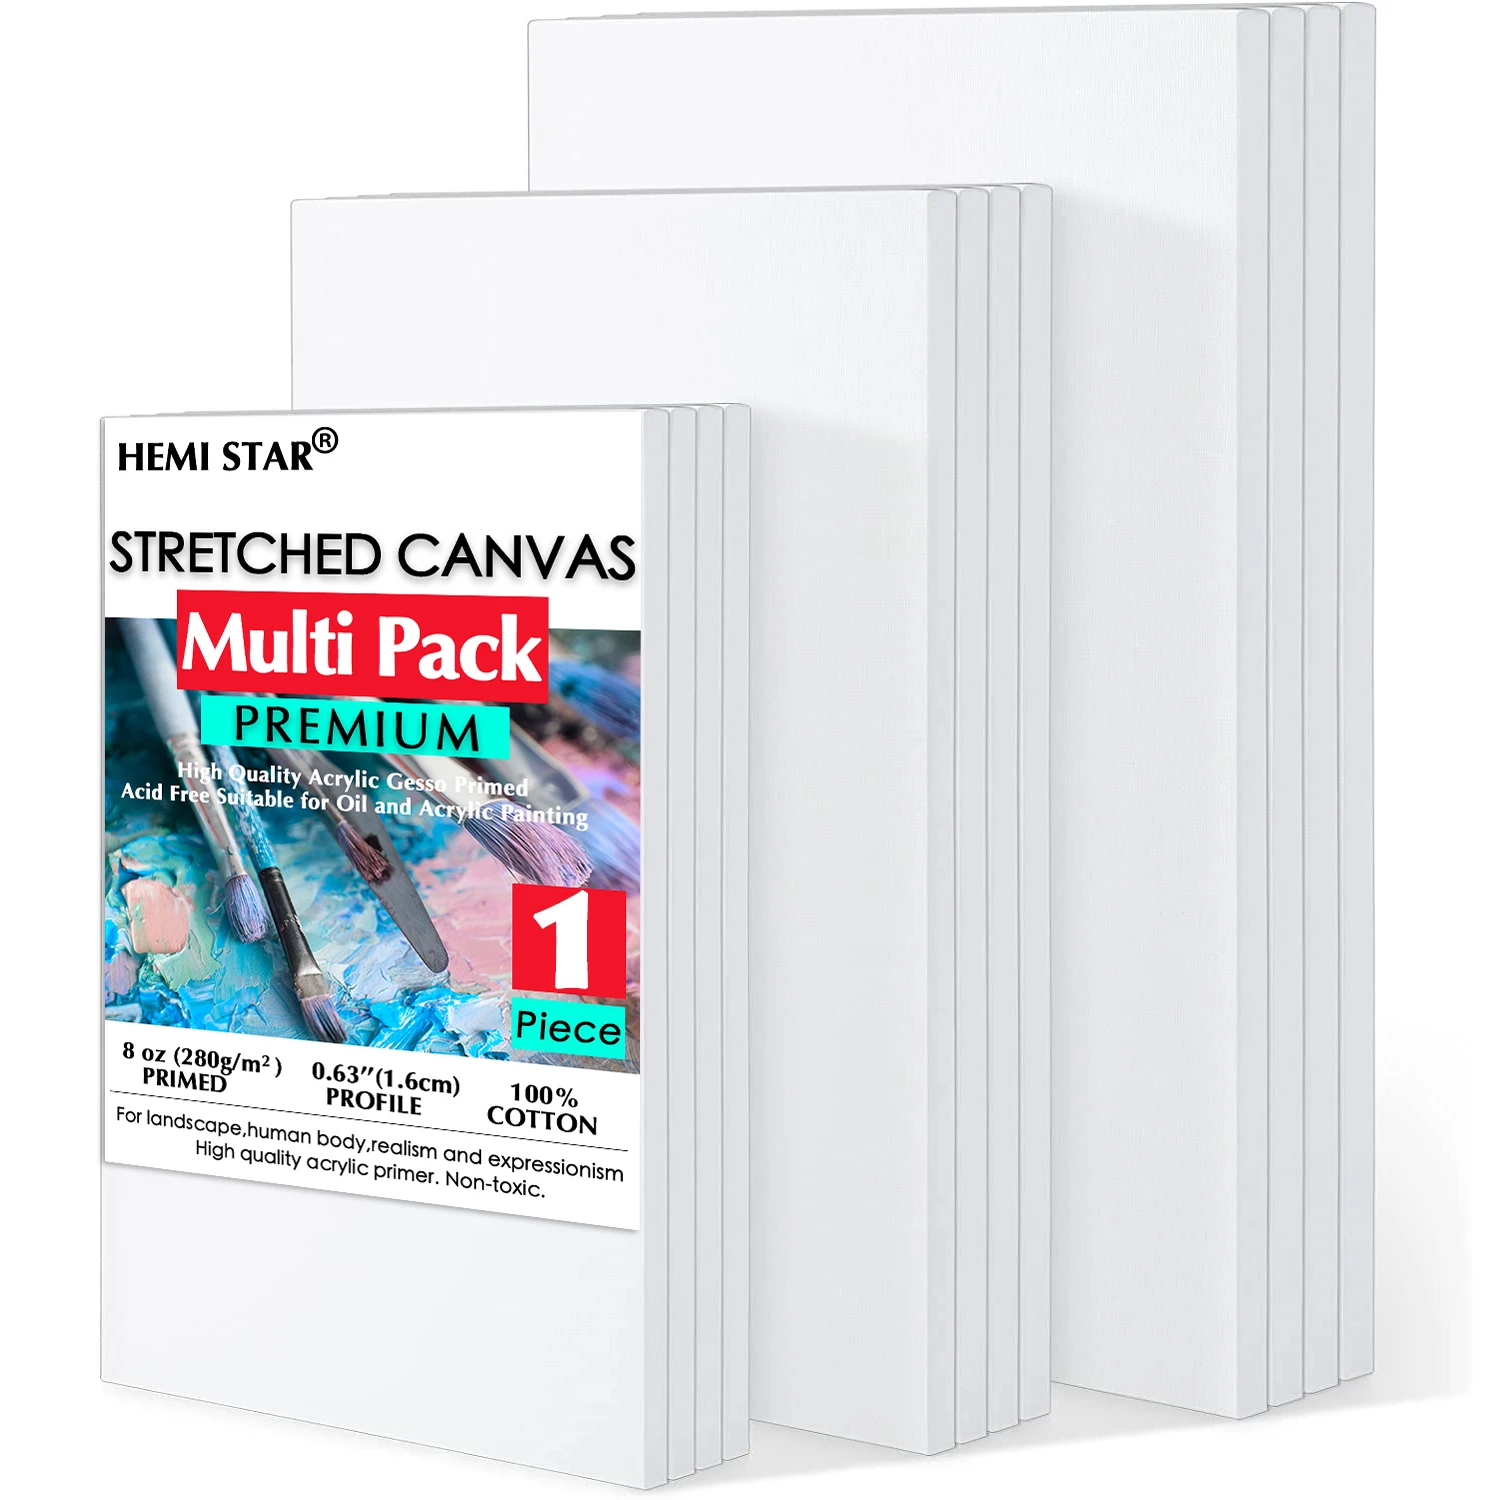 

Stretched Canvas, 1 piece Canvases for Painting, 100% Cotton, Primed White, Premium Painting Canvas for Beginners and Artists